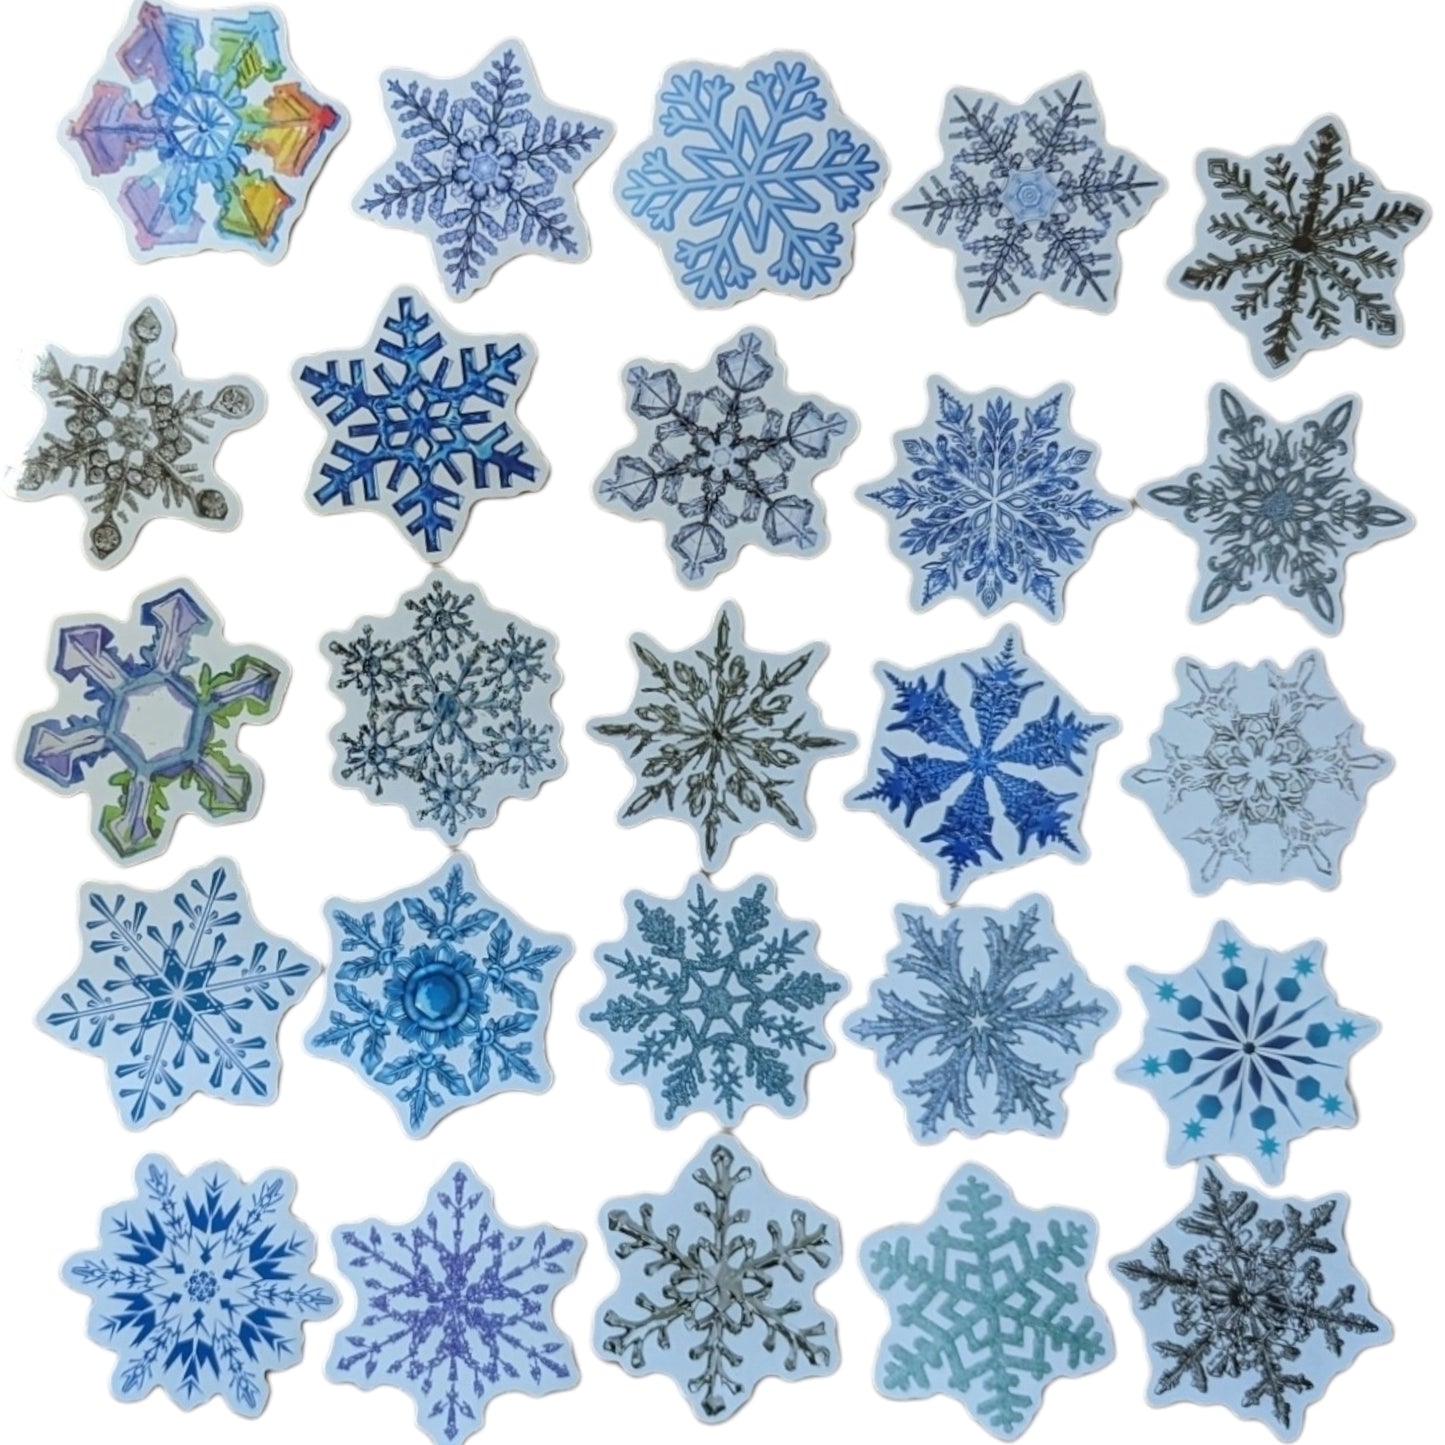 STICKER PACK - Pack #12 - 25 Pieces - Snowflakes ❄️